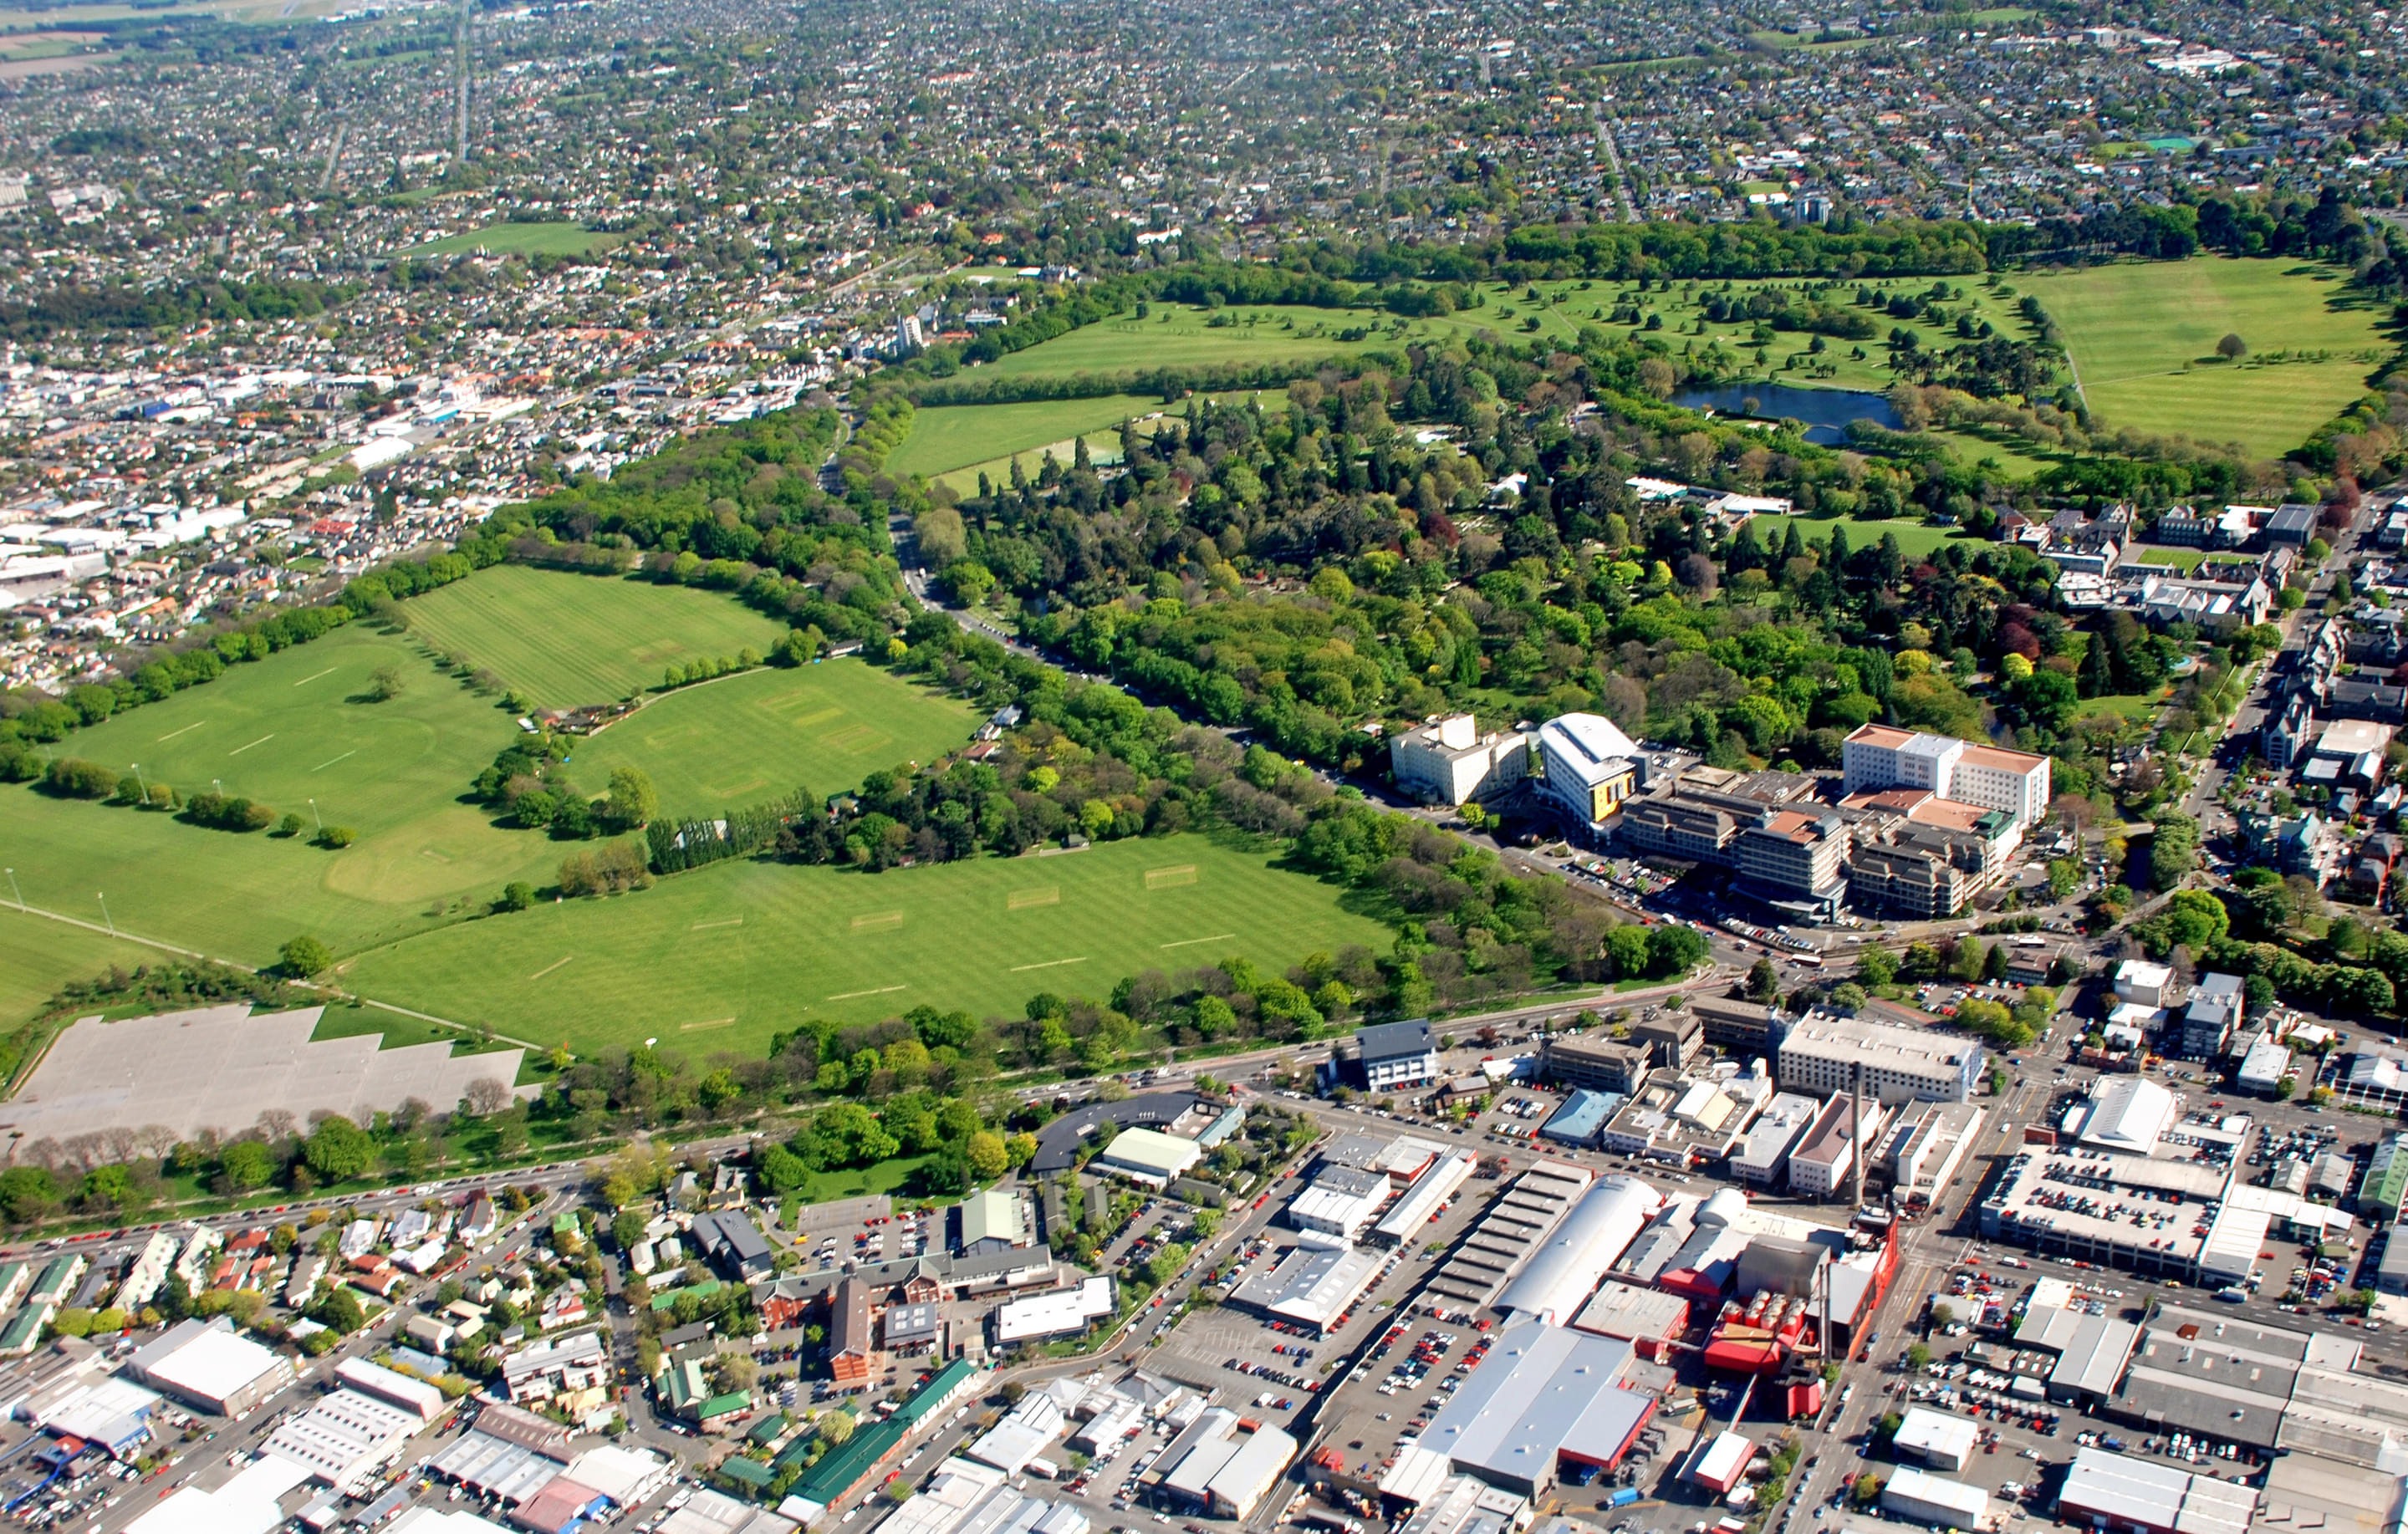 Hagley Park Overview